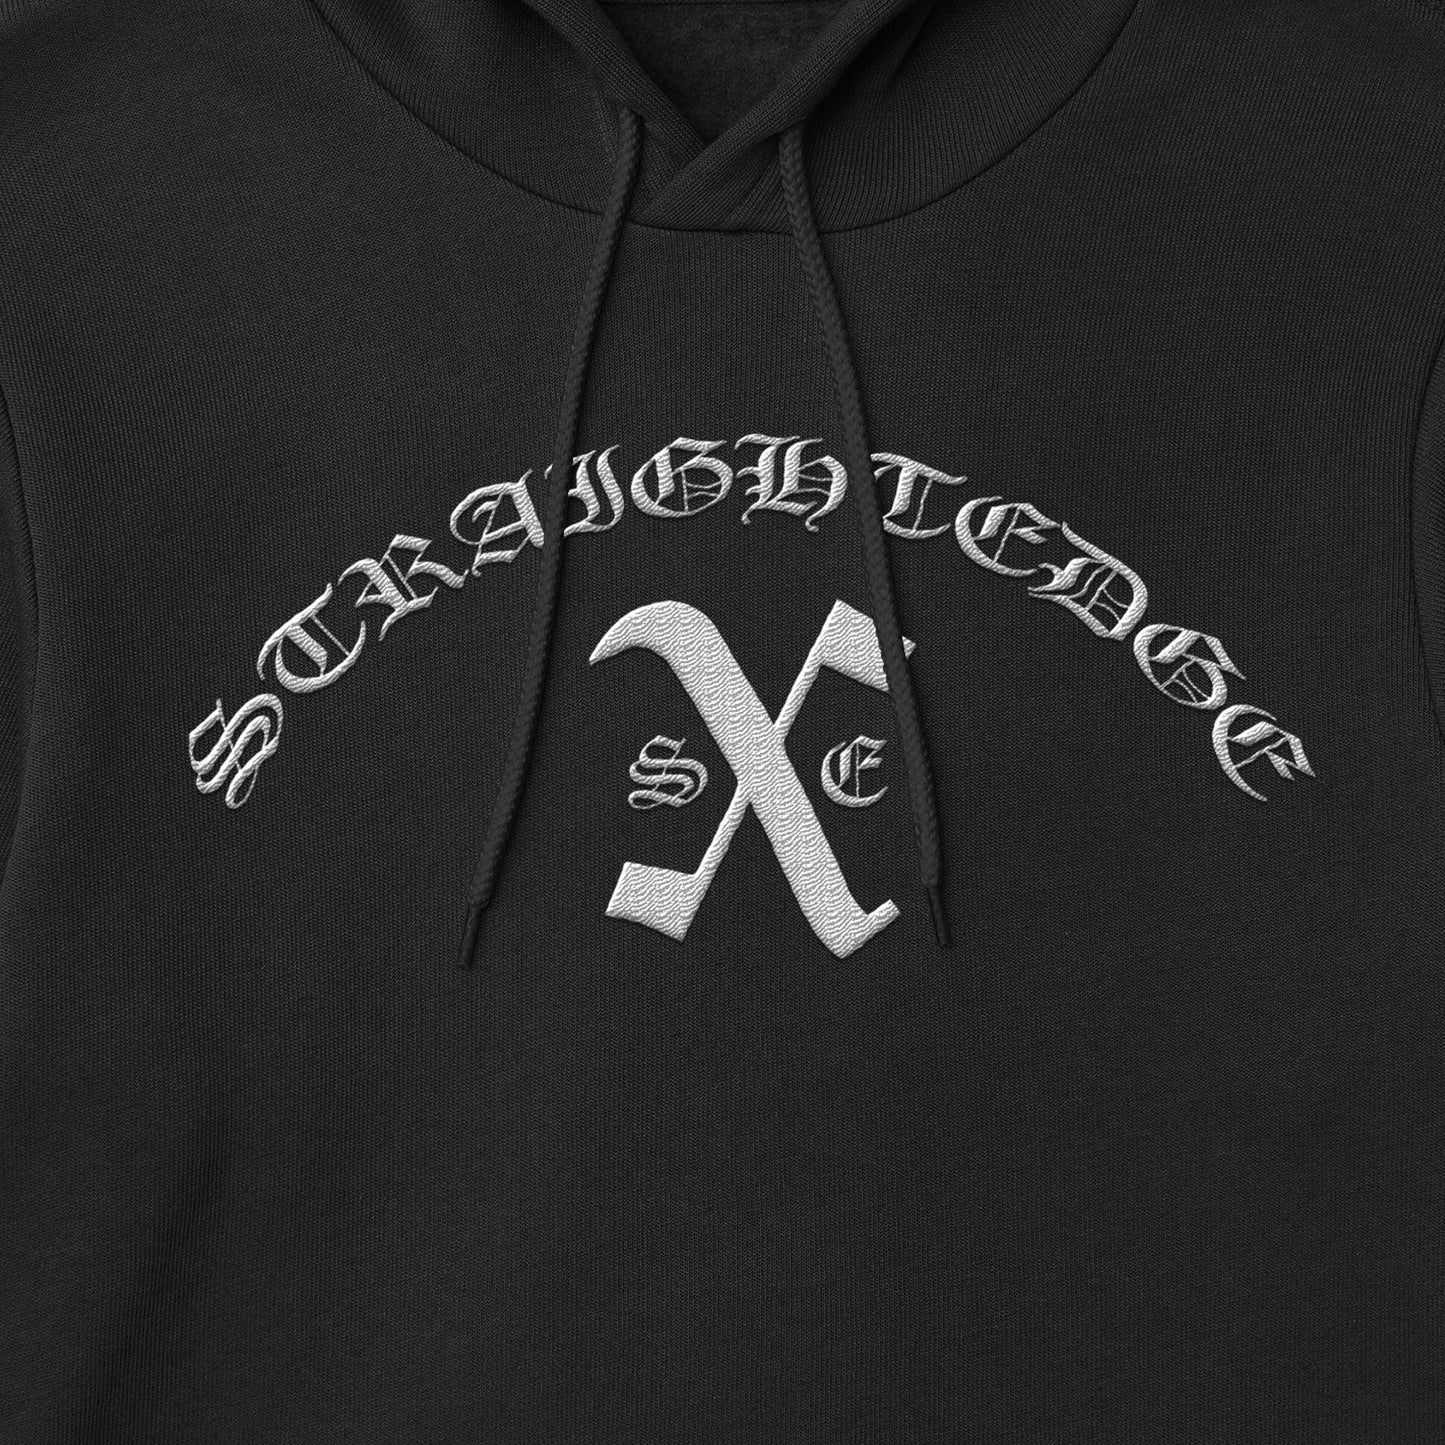 ONE DARK FLAME - 100% Stitched/Embroidered Hoodie